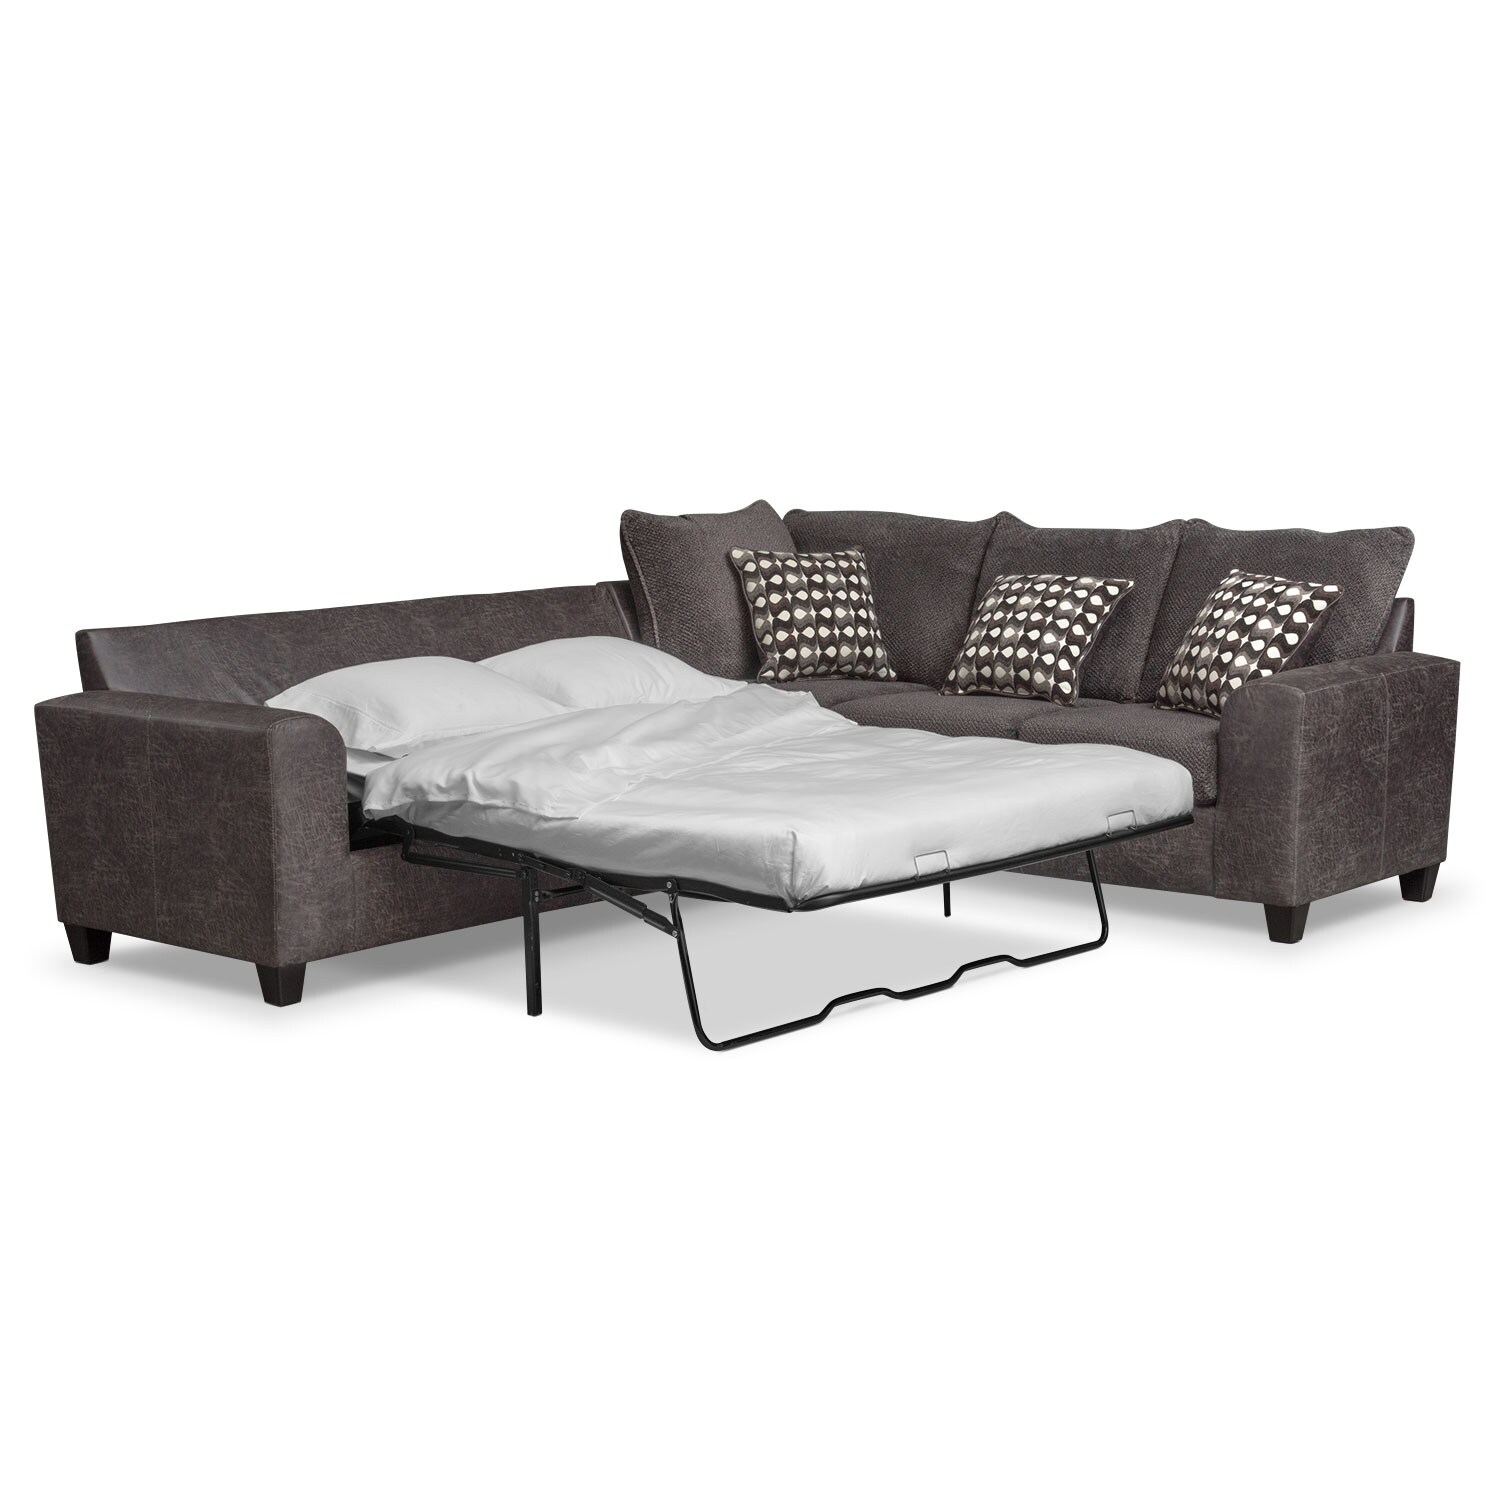 Brando 3Piece Sectional with Modular Chaise Smoke American Signature Furniture